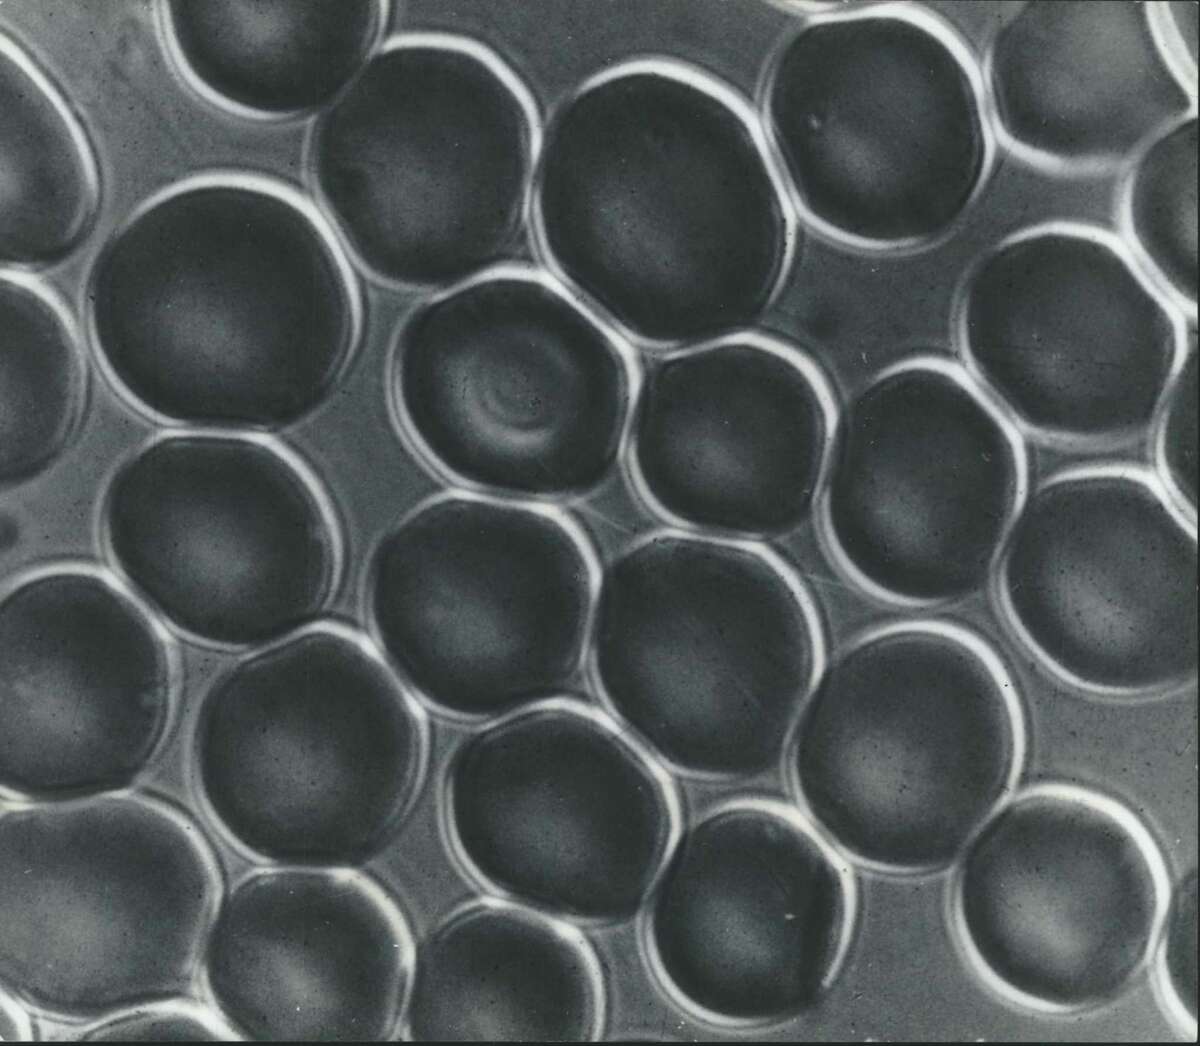 Body-human Red blood cells are pictured floating freely in blood plasma. They are so small that a row of 150 would be about 1/25 of an inch long, but there are so many red blood cells in the body that if arranged in a line they would stretch four times around the equator.